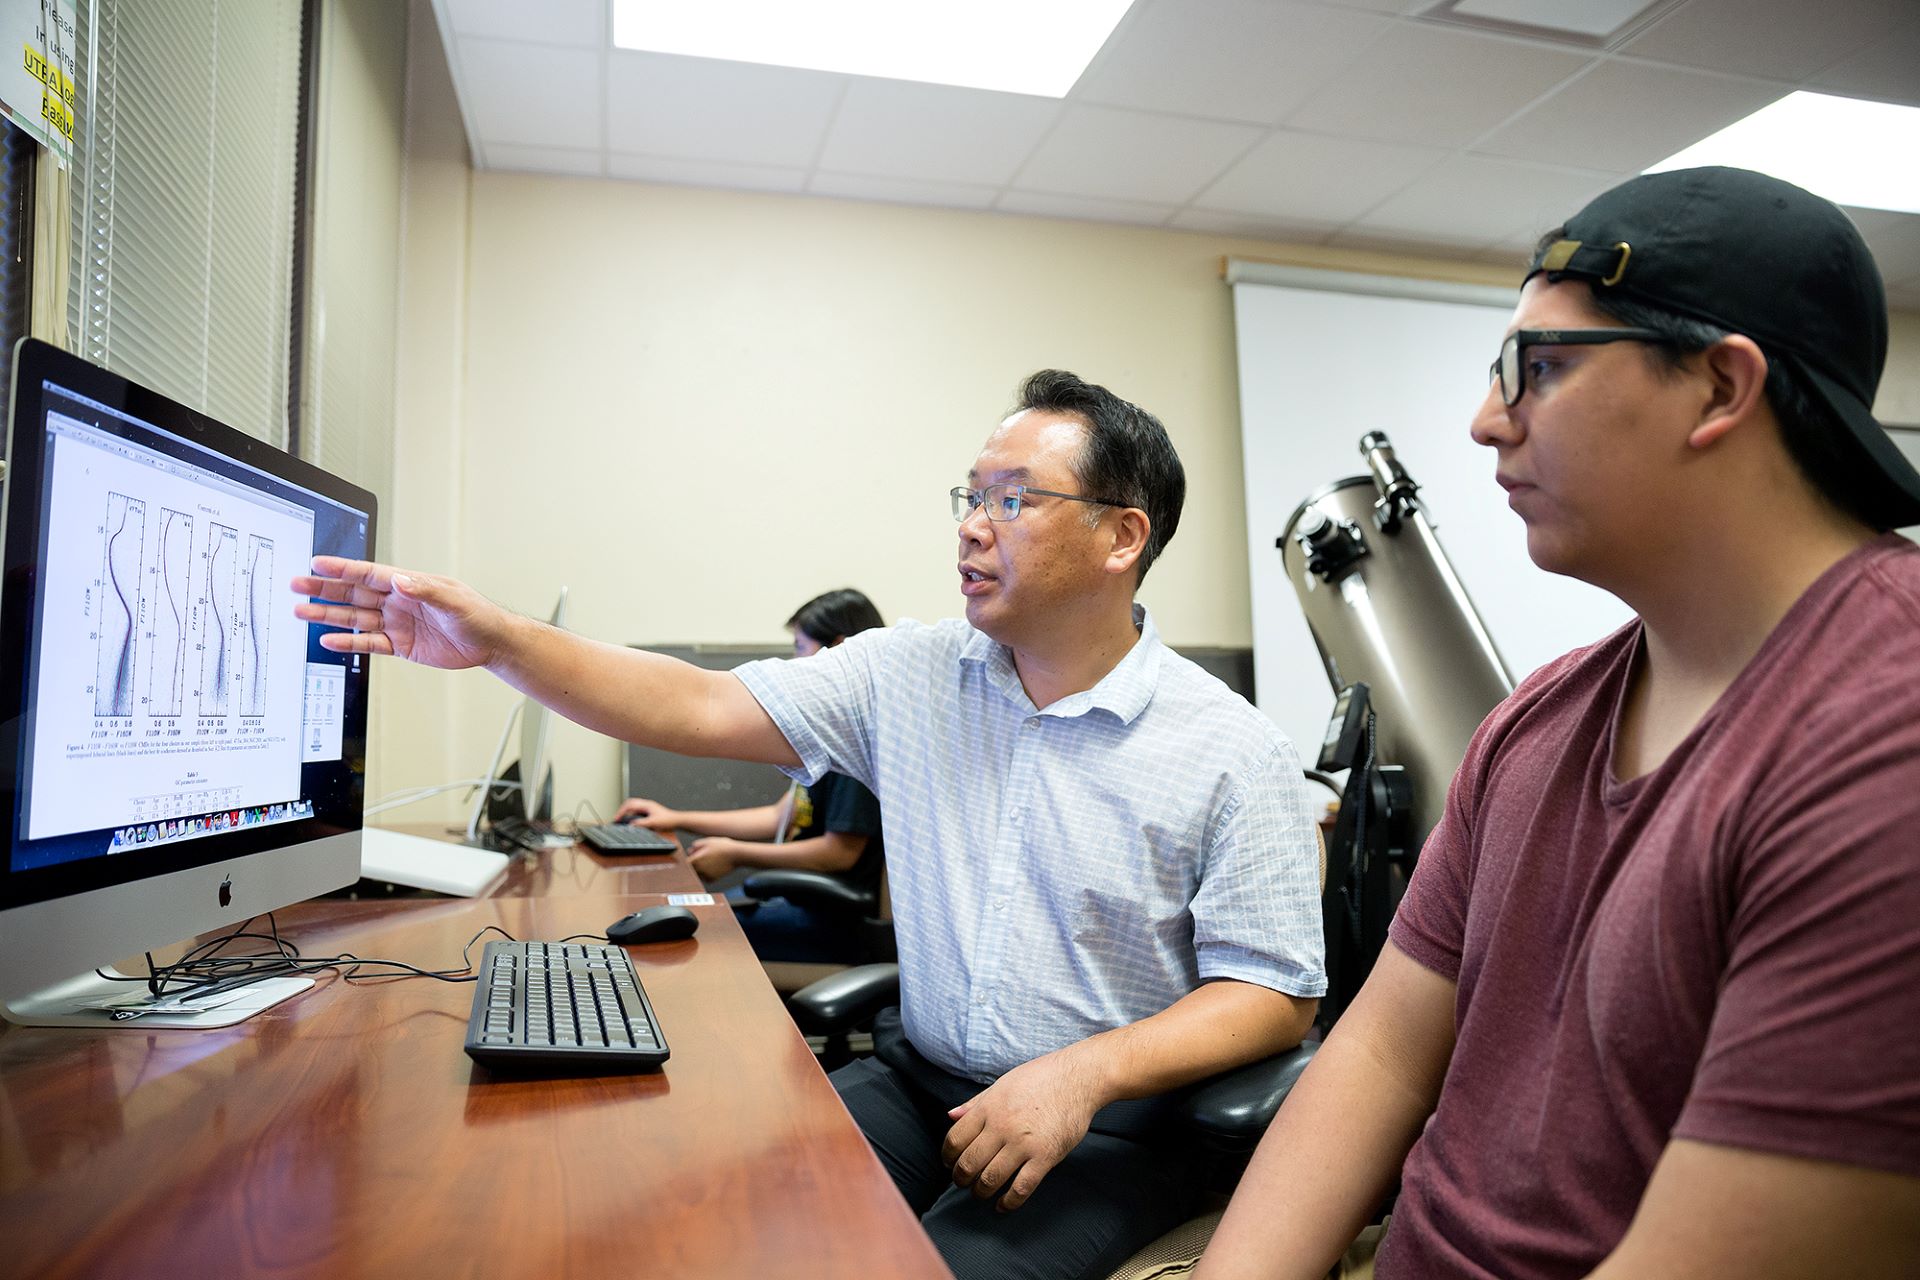 Professor showing computer screen to student